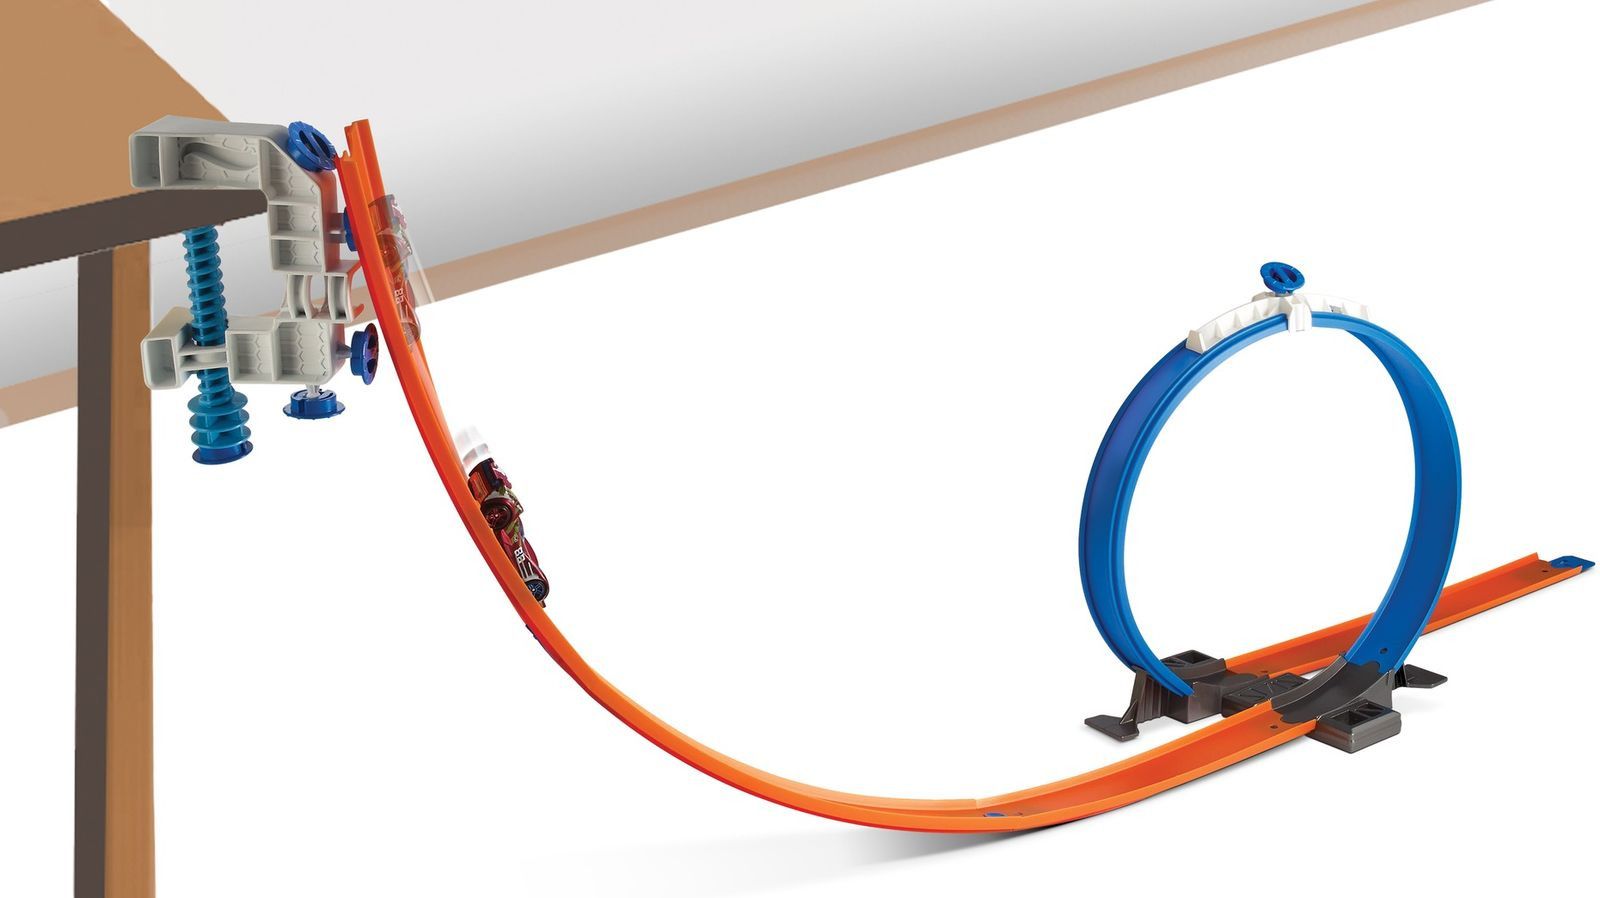 Hot Wheels Track Builder      Clamp It